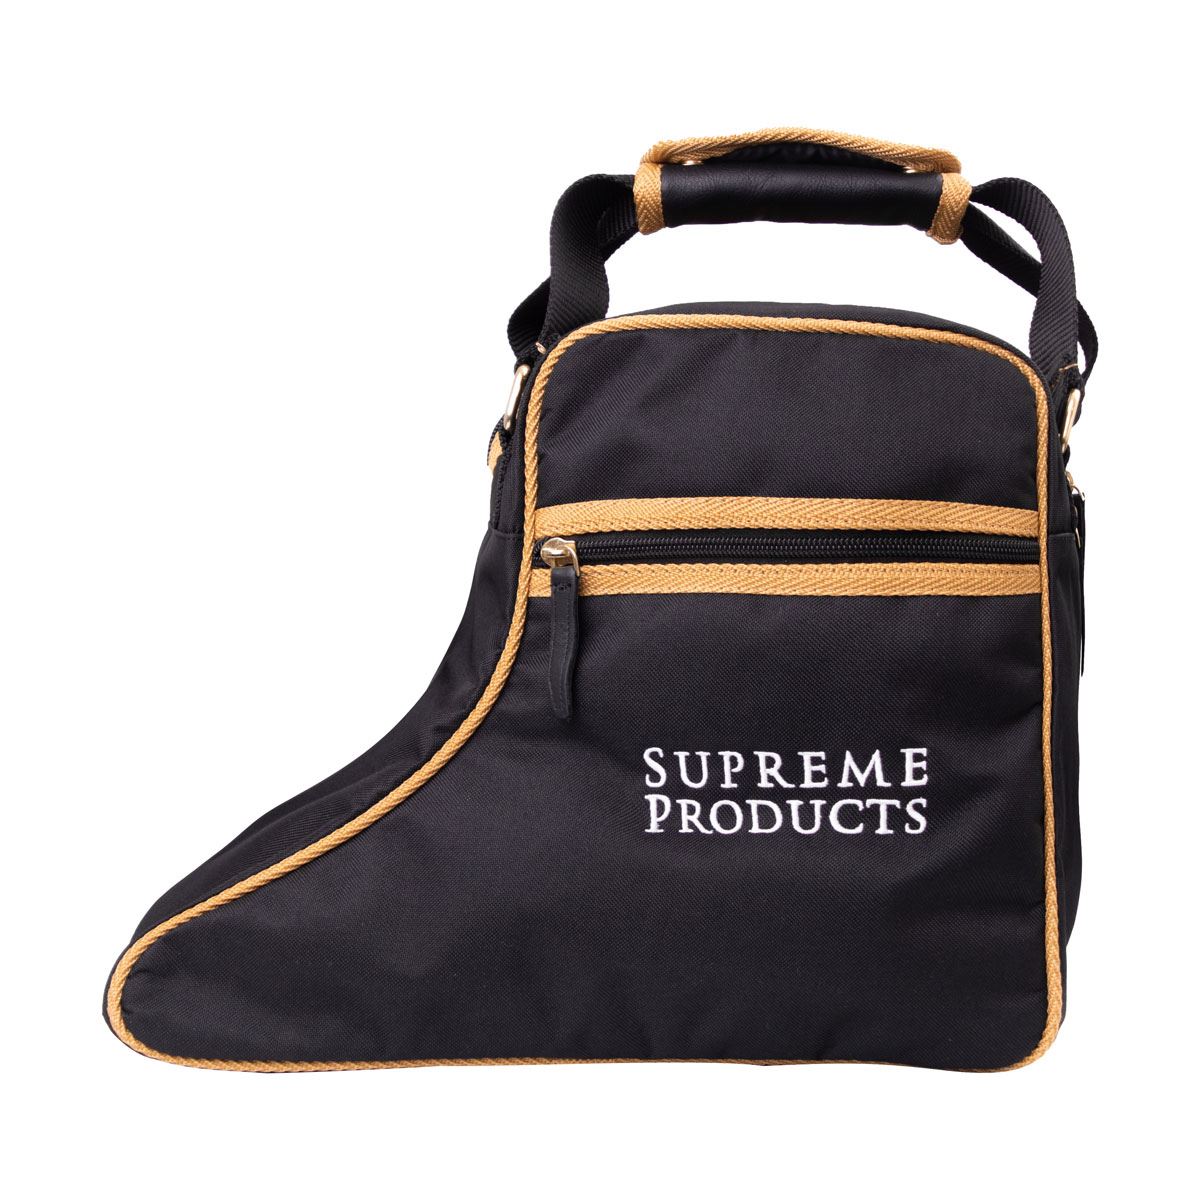 Supreme Products Pro Groom Jodhpur Boot Bag - Just Horse Riders